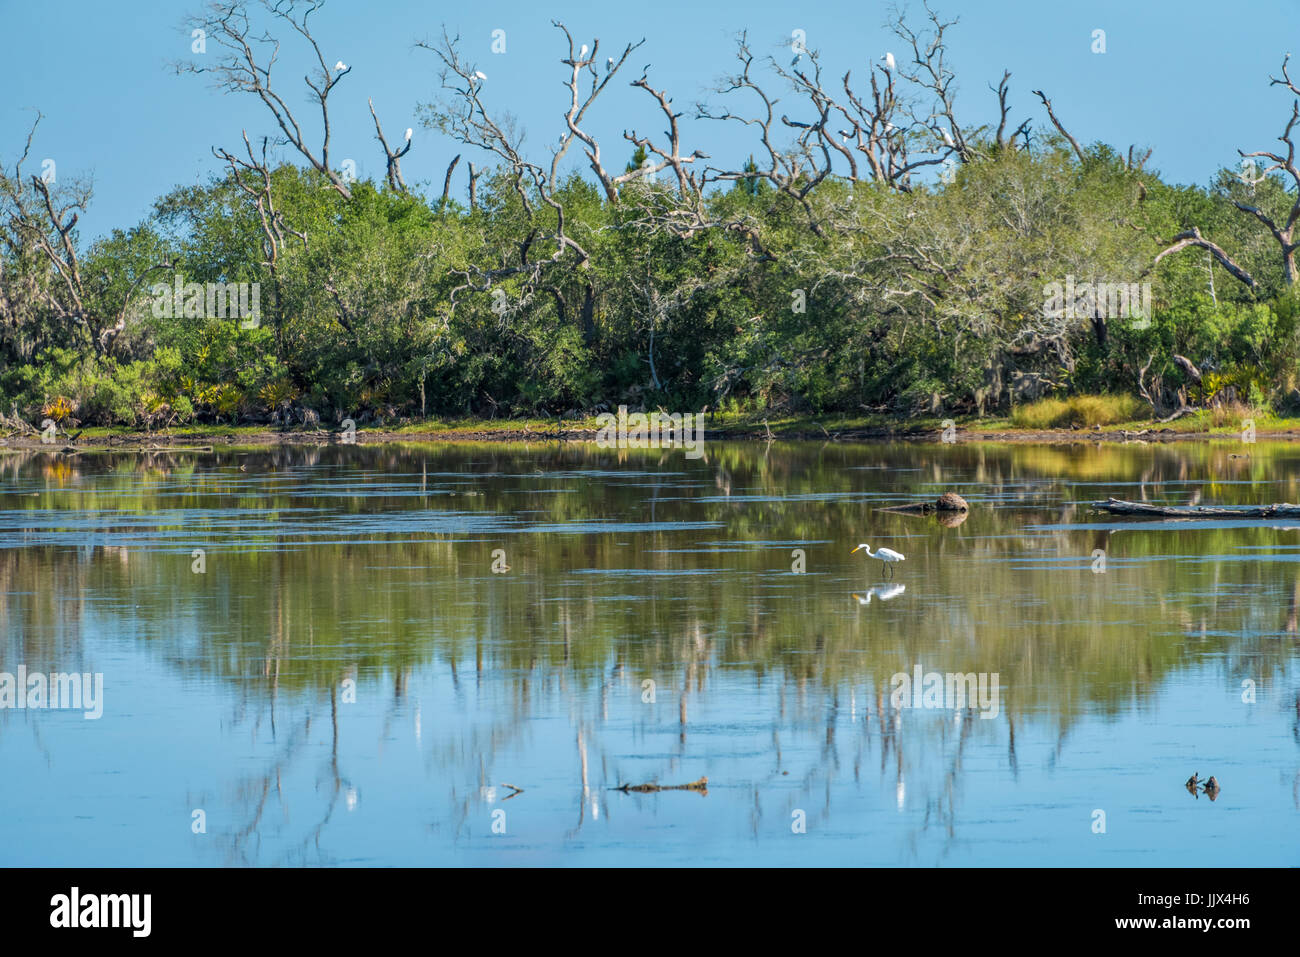 Great egrets gather at Simpson Creek in the Timucuan Ecological and Historical Preserve on Big Talbot Island in Jacksonville, Florida, USA. Stock Photo